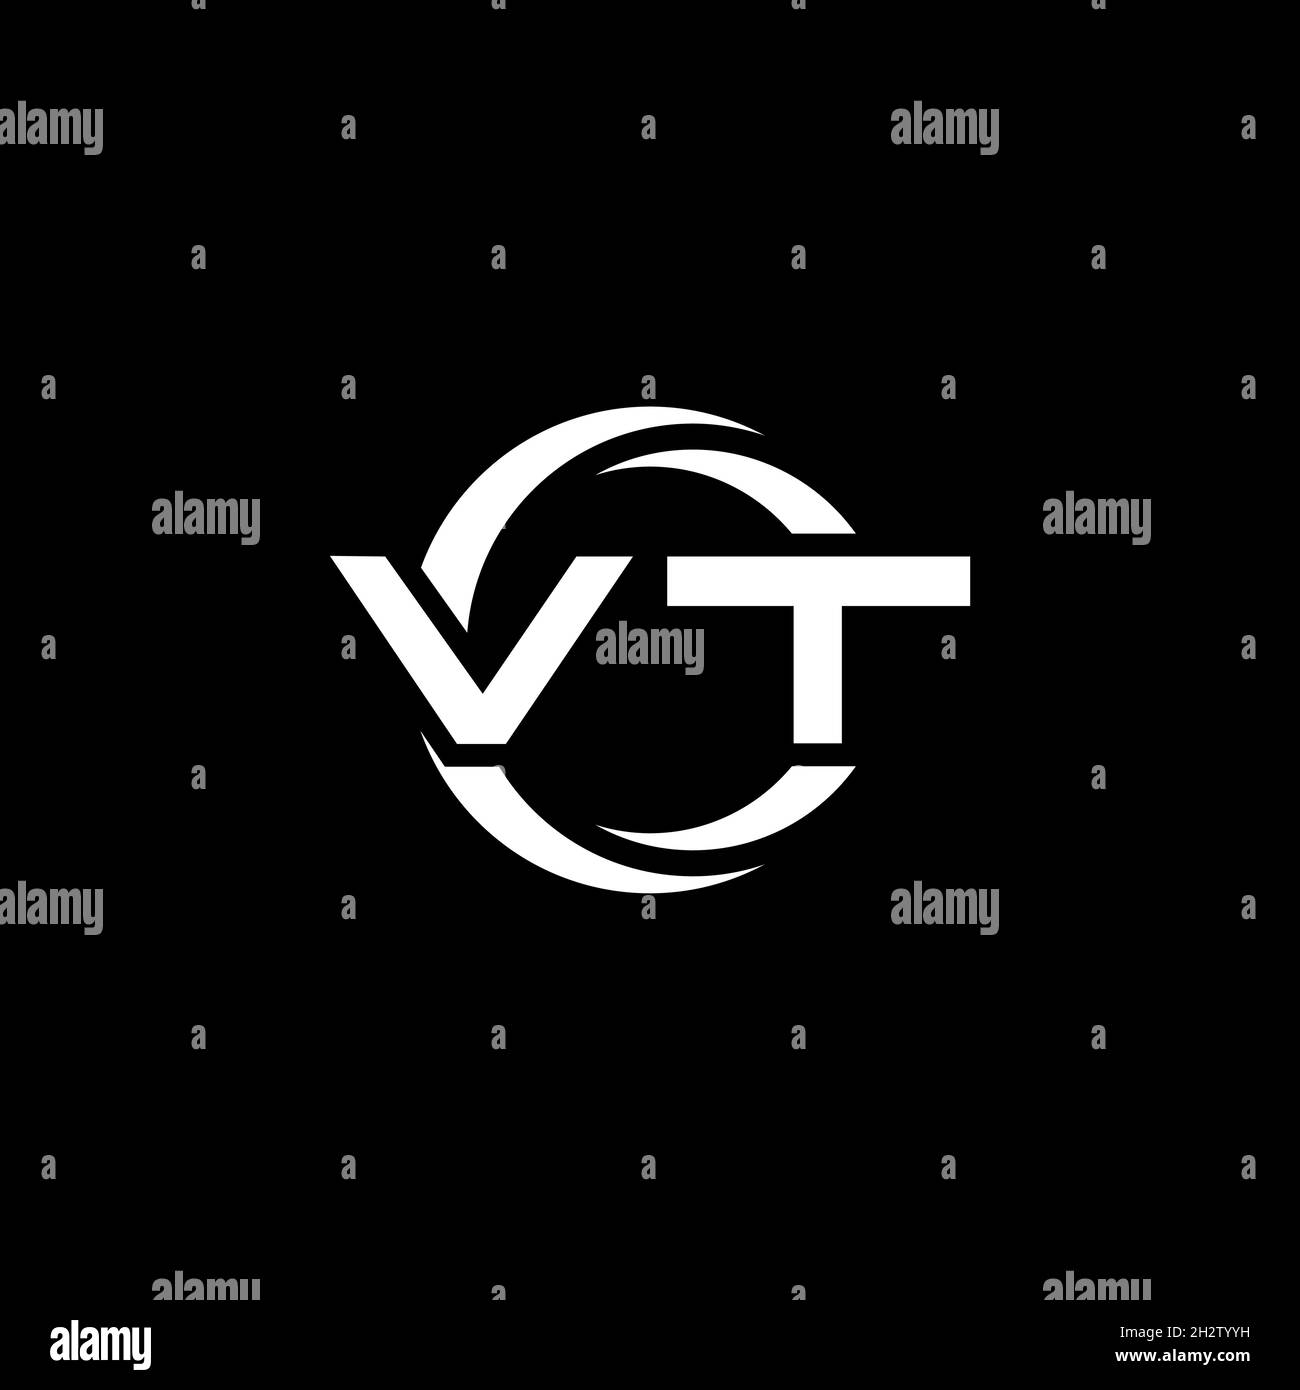 VT Monogram logo letter with simple shape and circle rounded design template isolated on black background Stock Vector